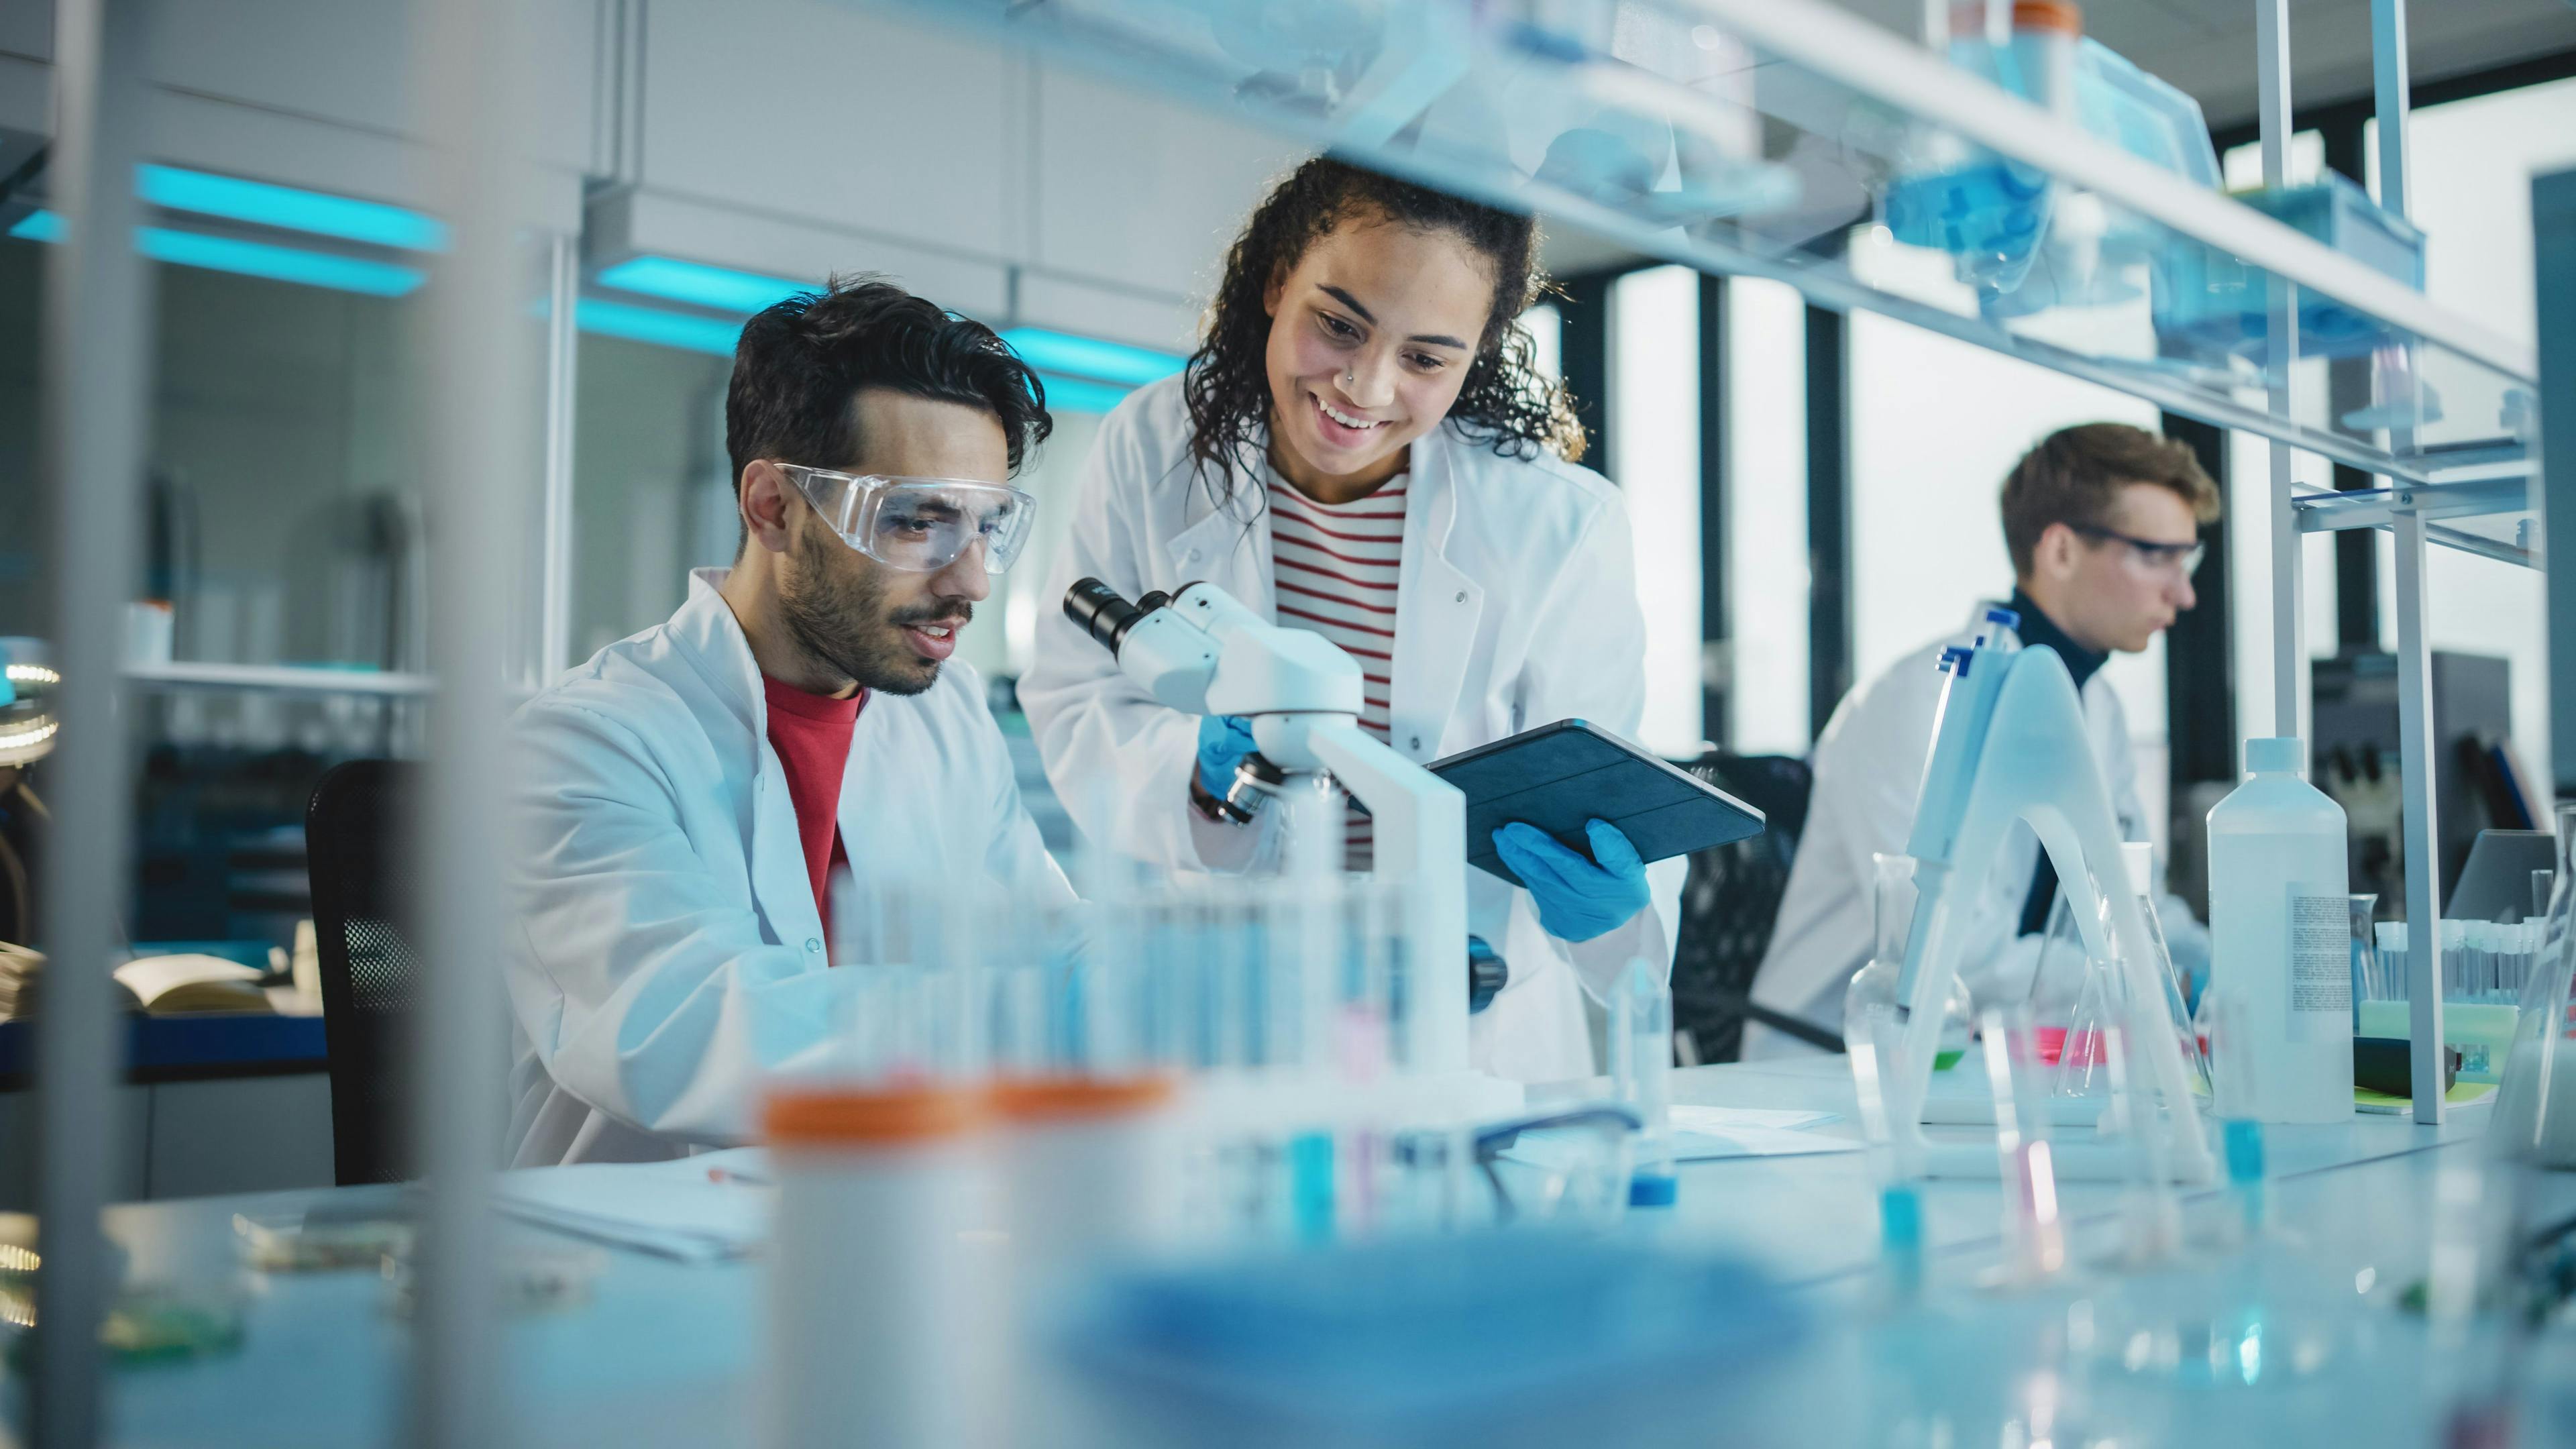 Modern Medical Research Laboratory: Portrait of Latin and Black Young Scientists Using Microscope, Digital Tablet, Doing Sample Analysis, Talking. Diverse Team of Specialists work in Advanced Lab. Image Credit: Adobe Stock Images/Gorodenkoff